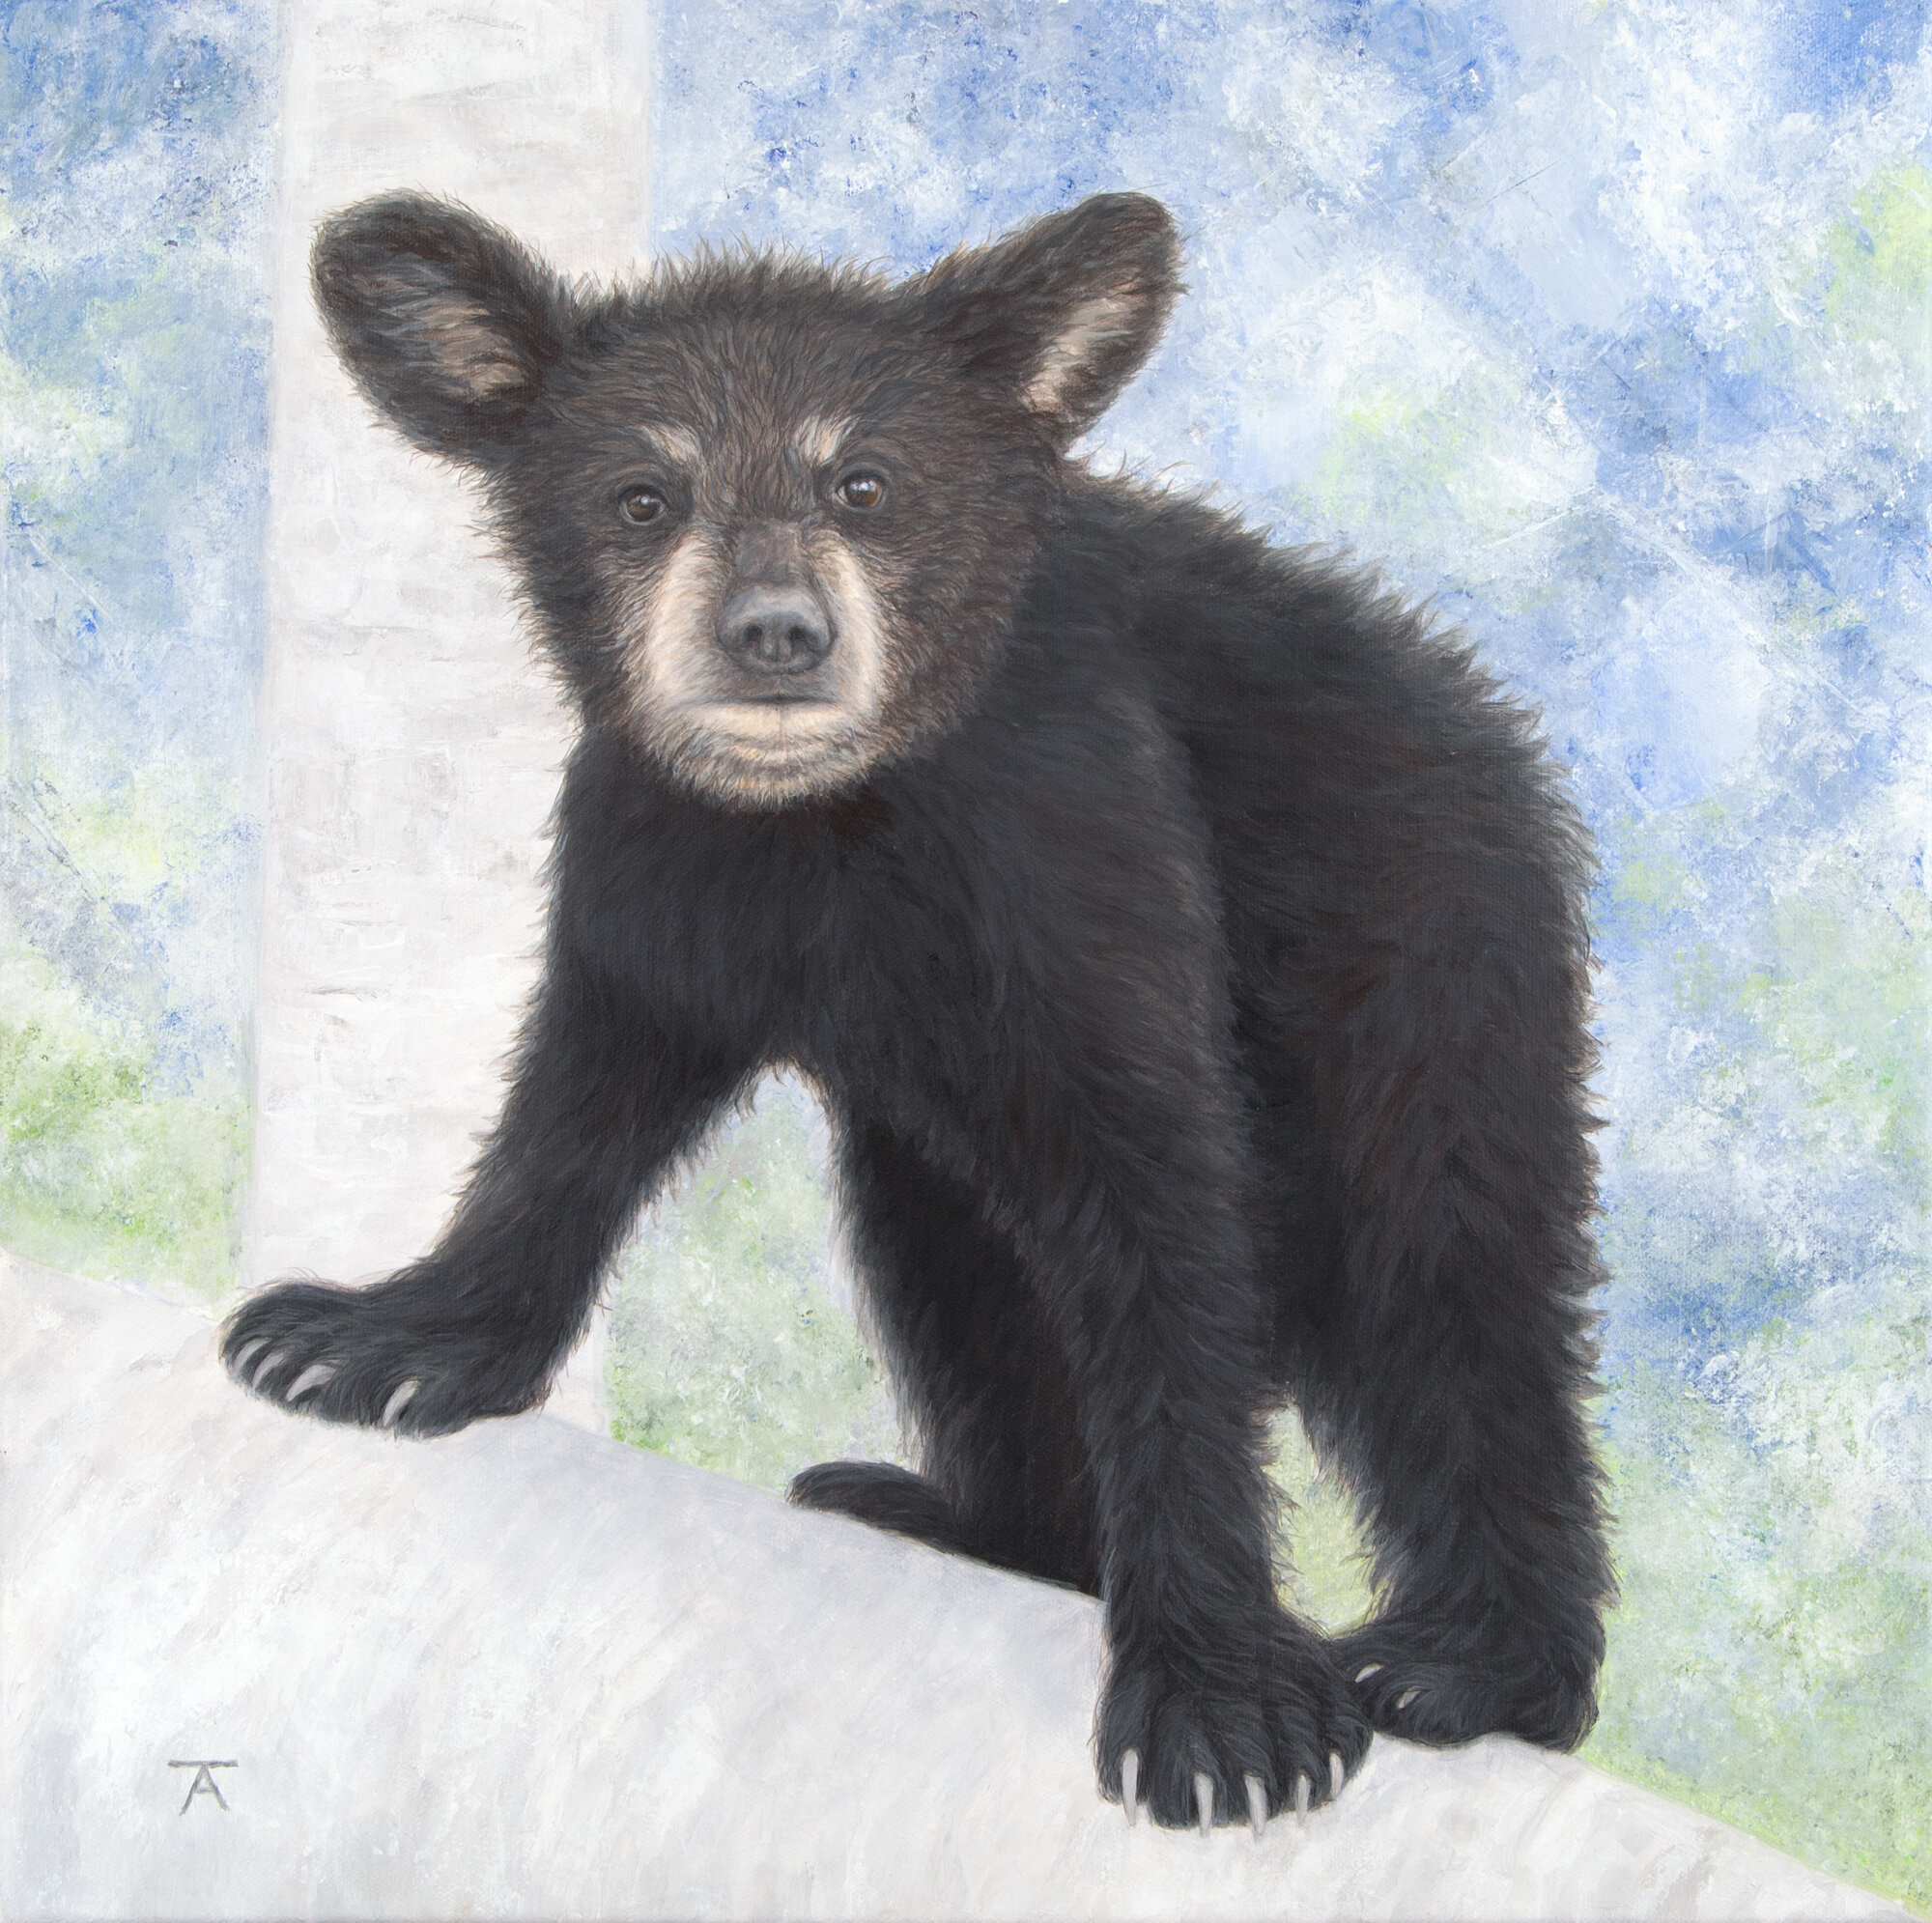 Into the Woods: Bear Cub - sold